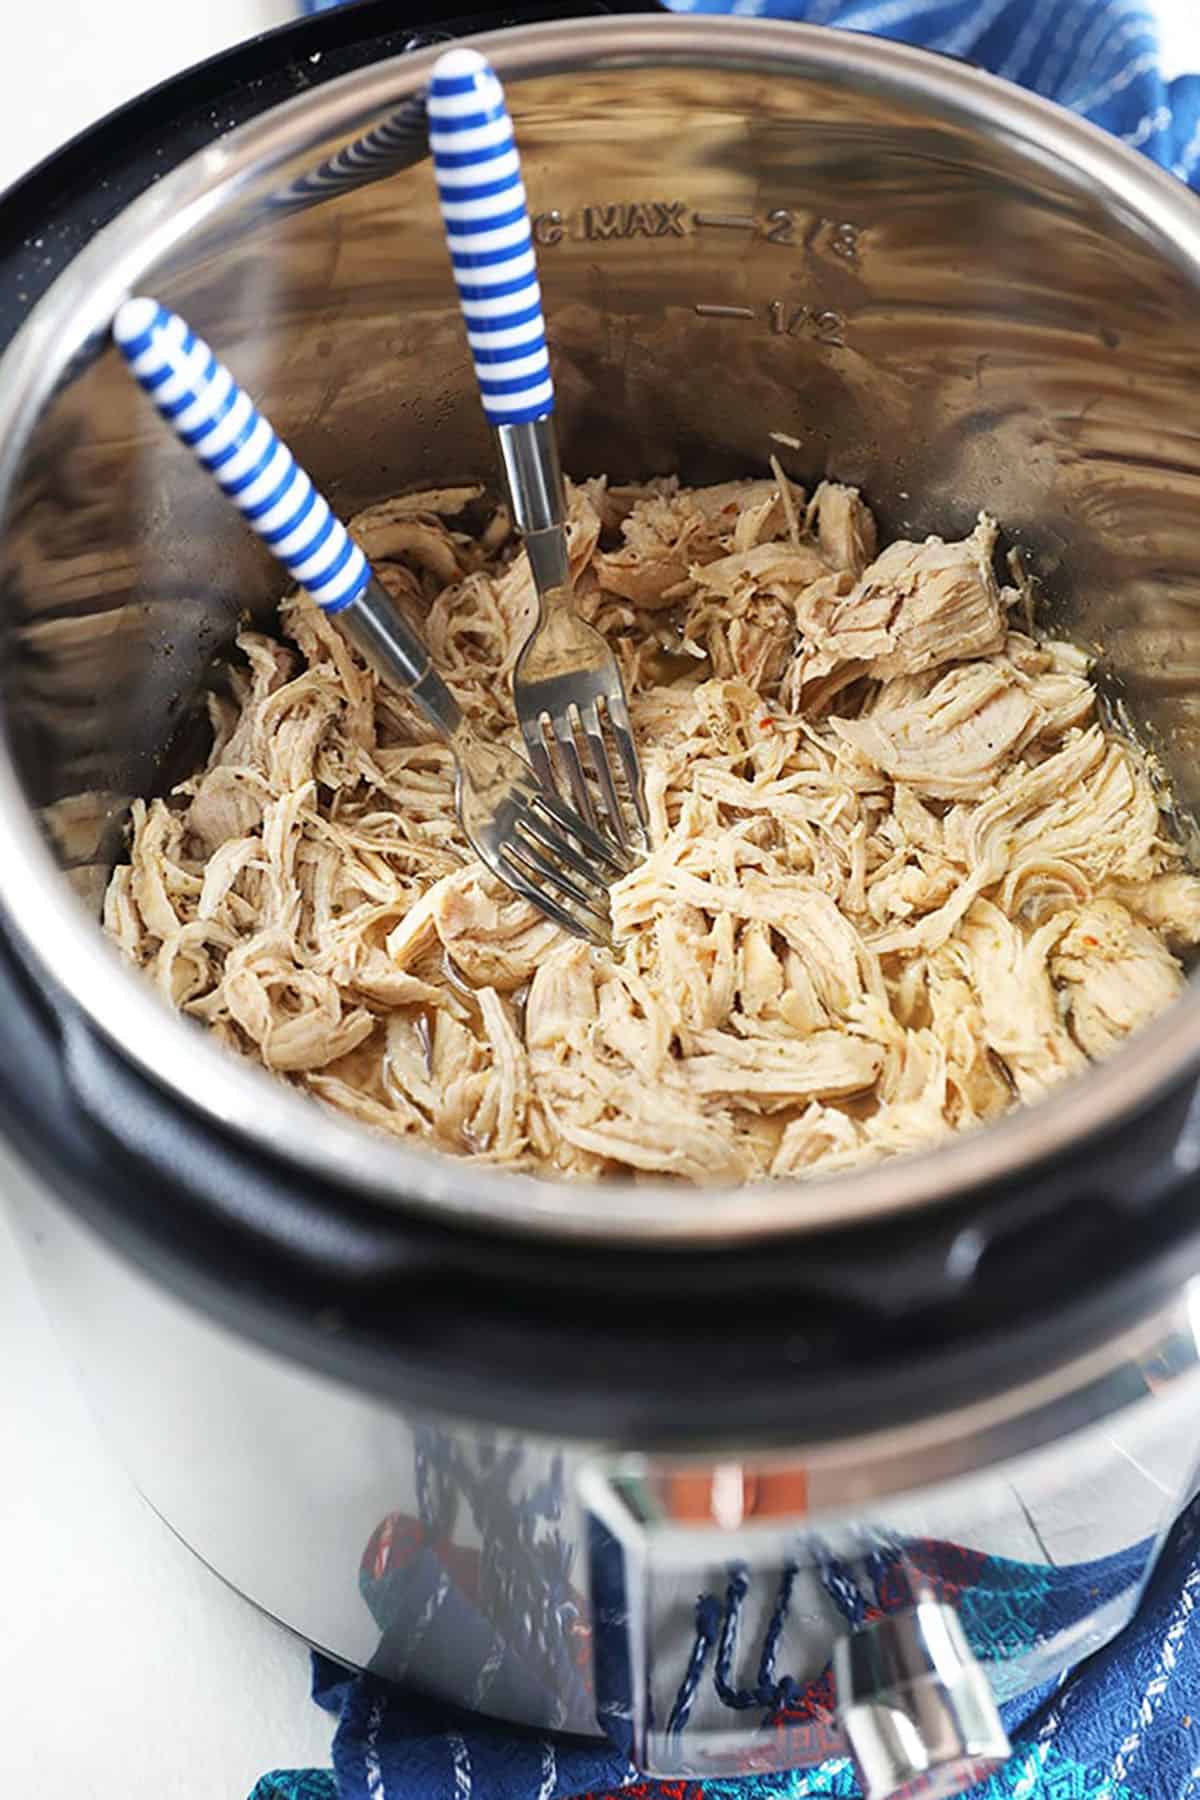 Shredded chicken in an Instant Pot with two forks.